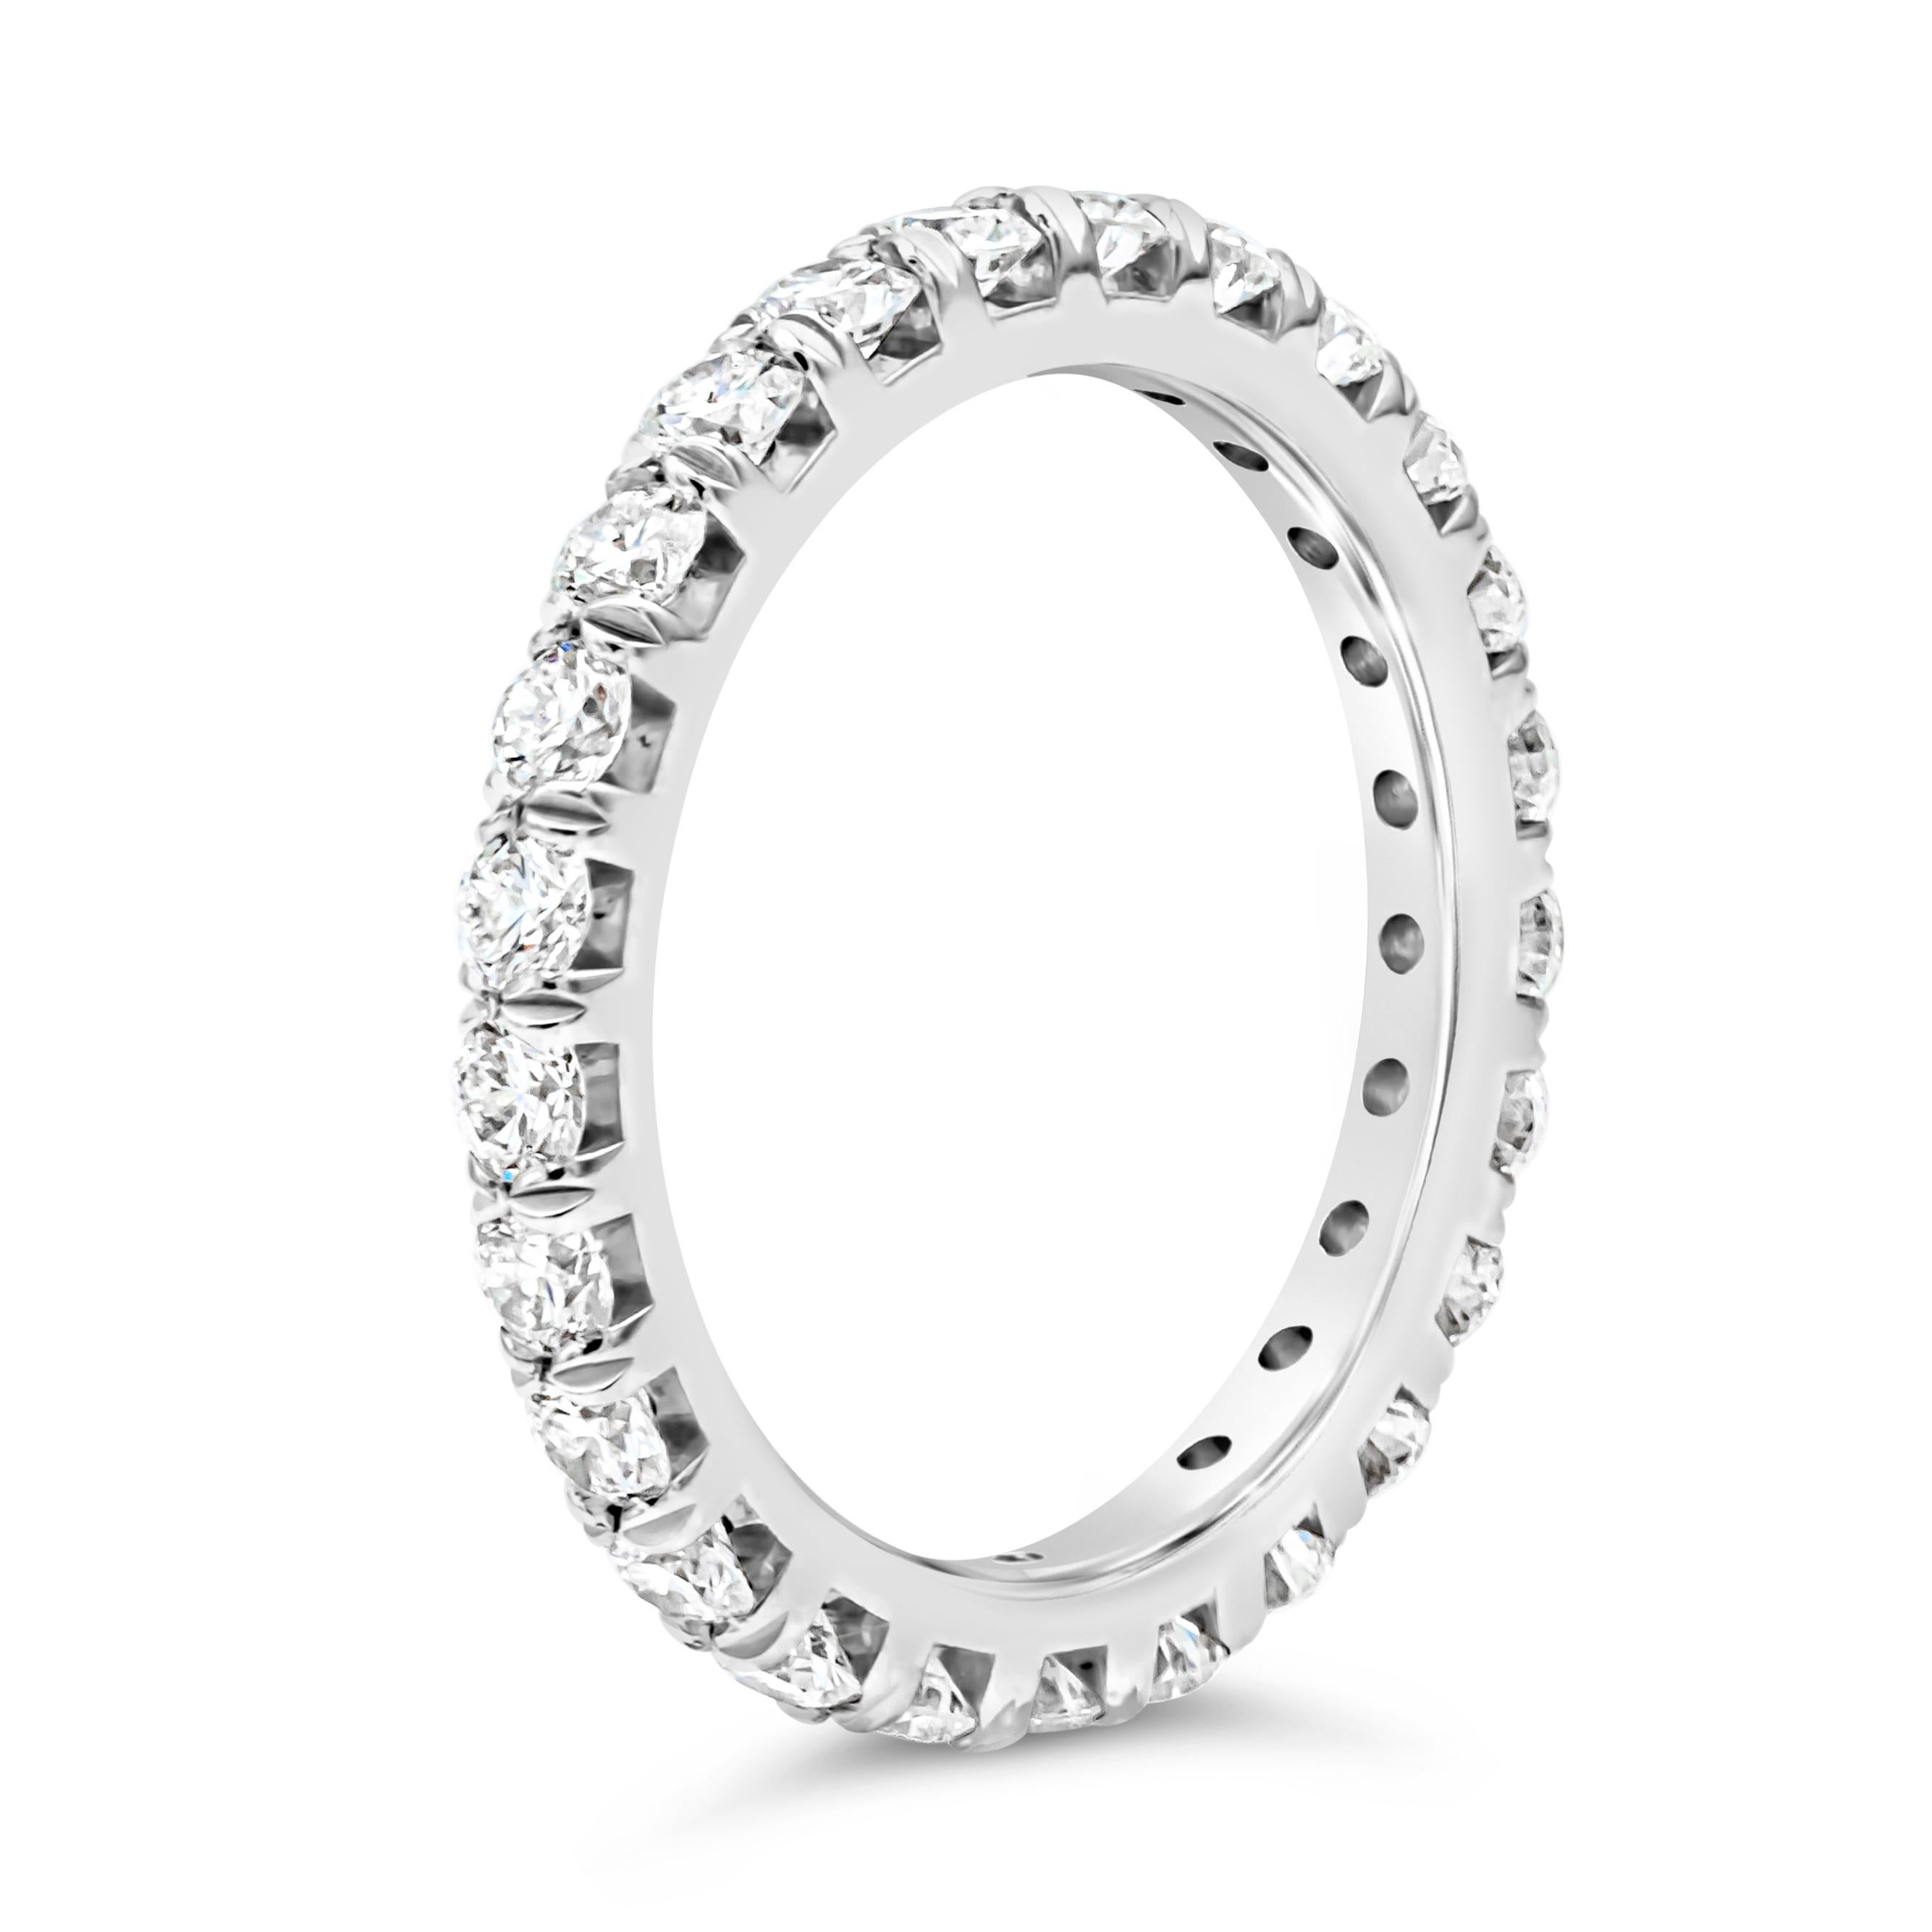 A classic eternity wedding band showcasing a line of 25 brilliant round cut diamonds weighing 1.45 carats total, G color and VS in clarity, set in a four prong basket setting and French pave set. Finely made in platinum. Size 6.5 US resizable upon